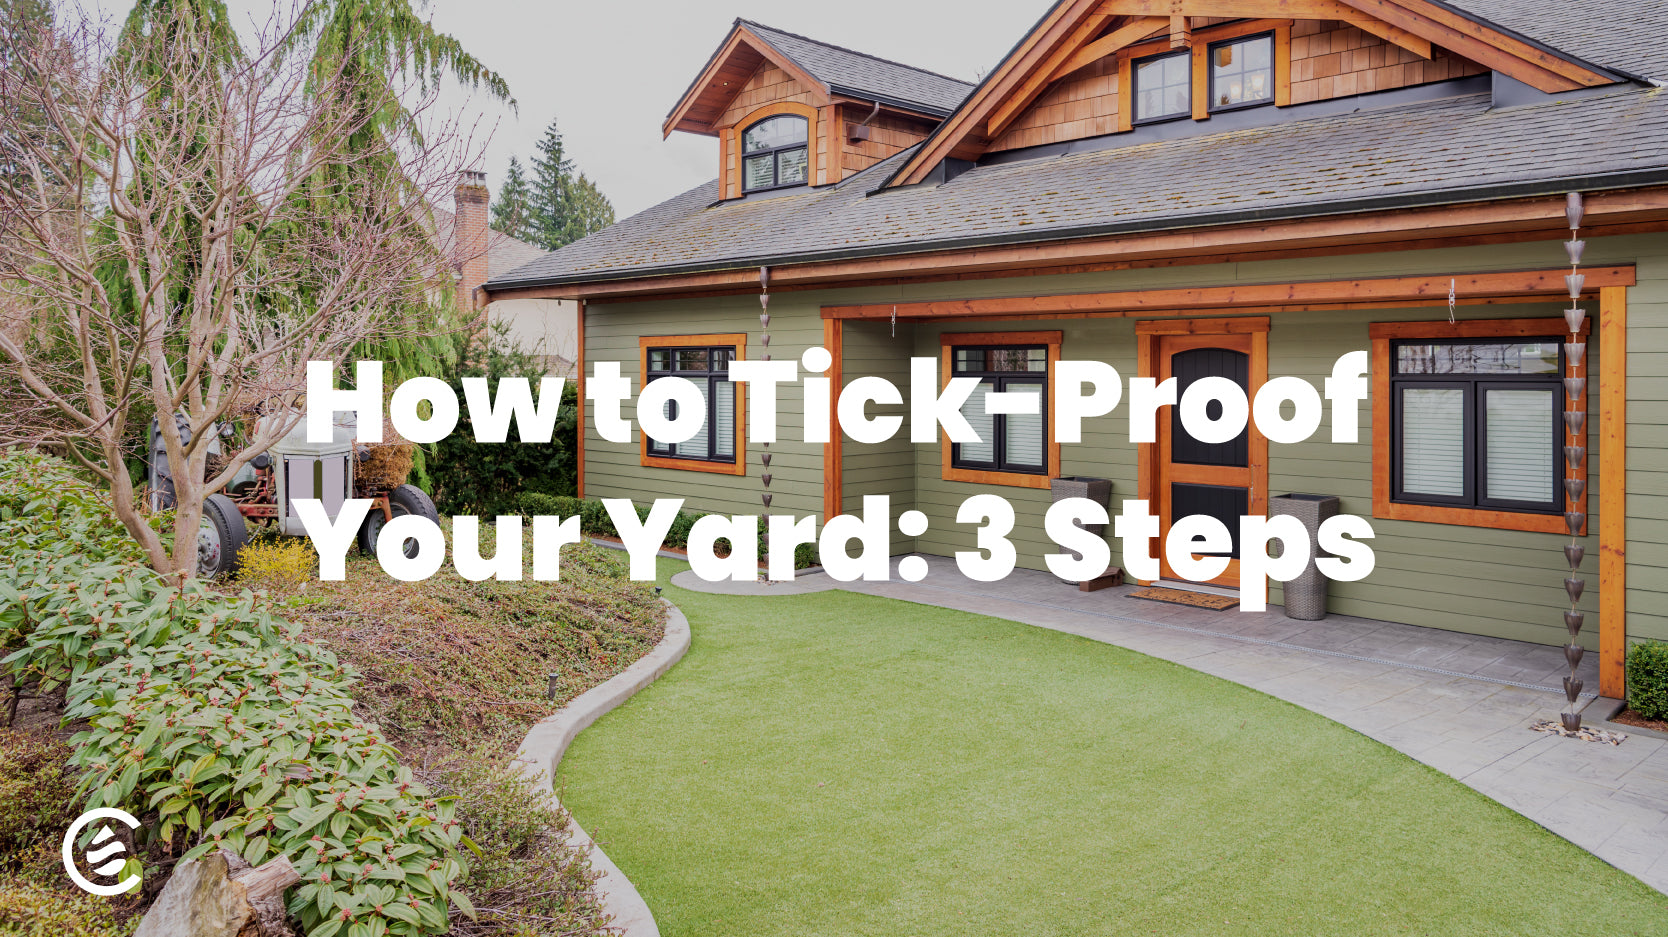 Cedarcide Blog Post Image, How to Tick-Proof Your Yard: 3 Steps